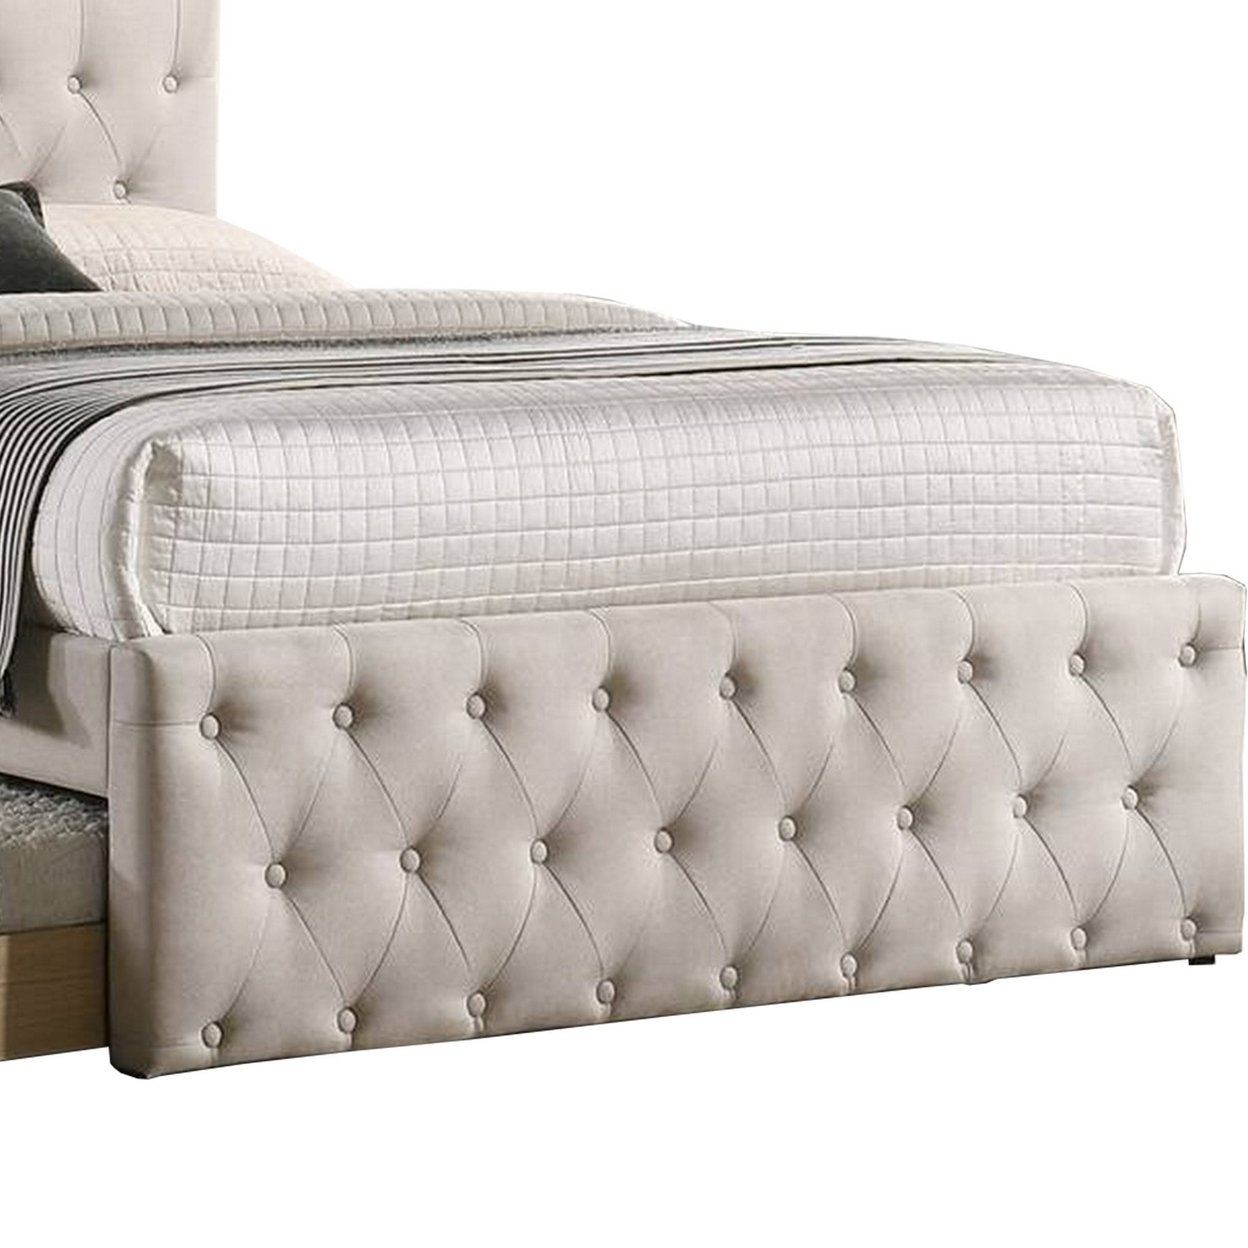 Nek Wood Full Size Upholstered Bed With Twin Trundle, Taupe Burlap Frame- Saltoro Sherpi